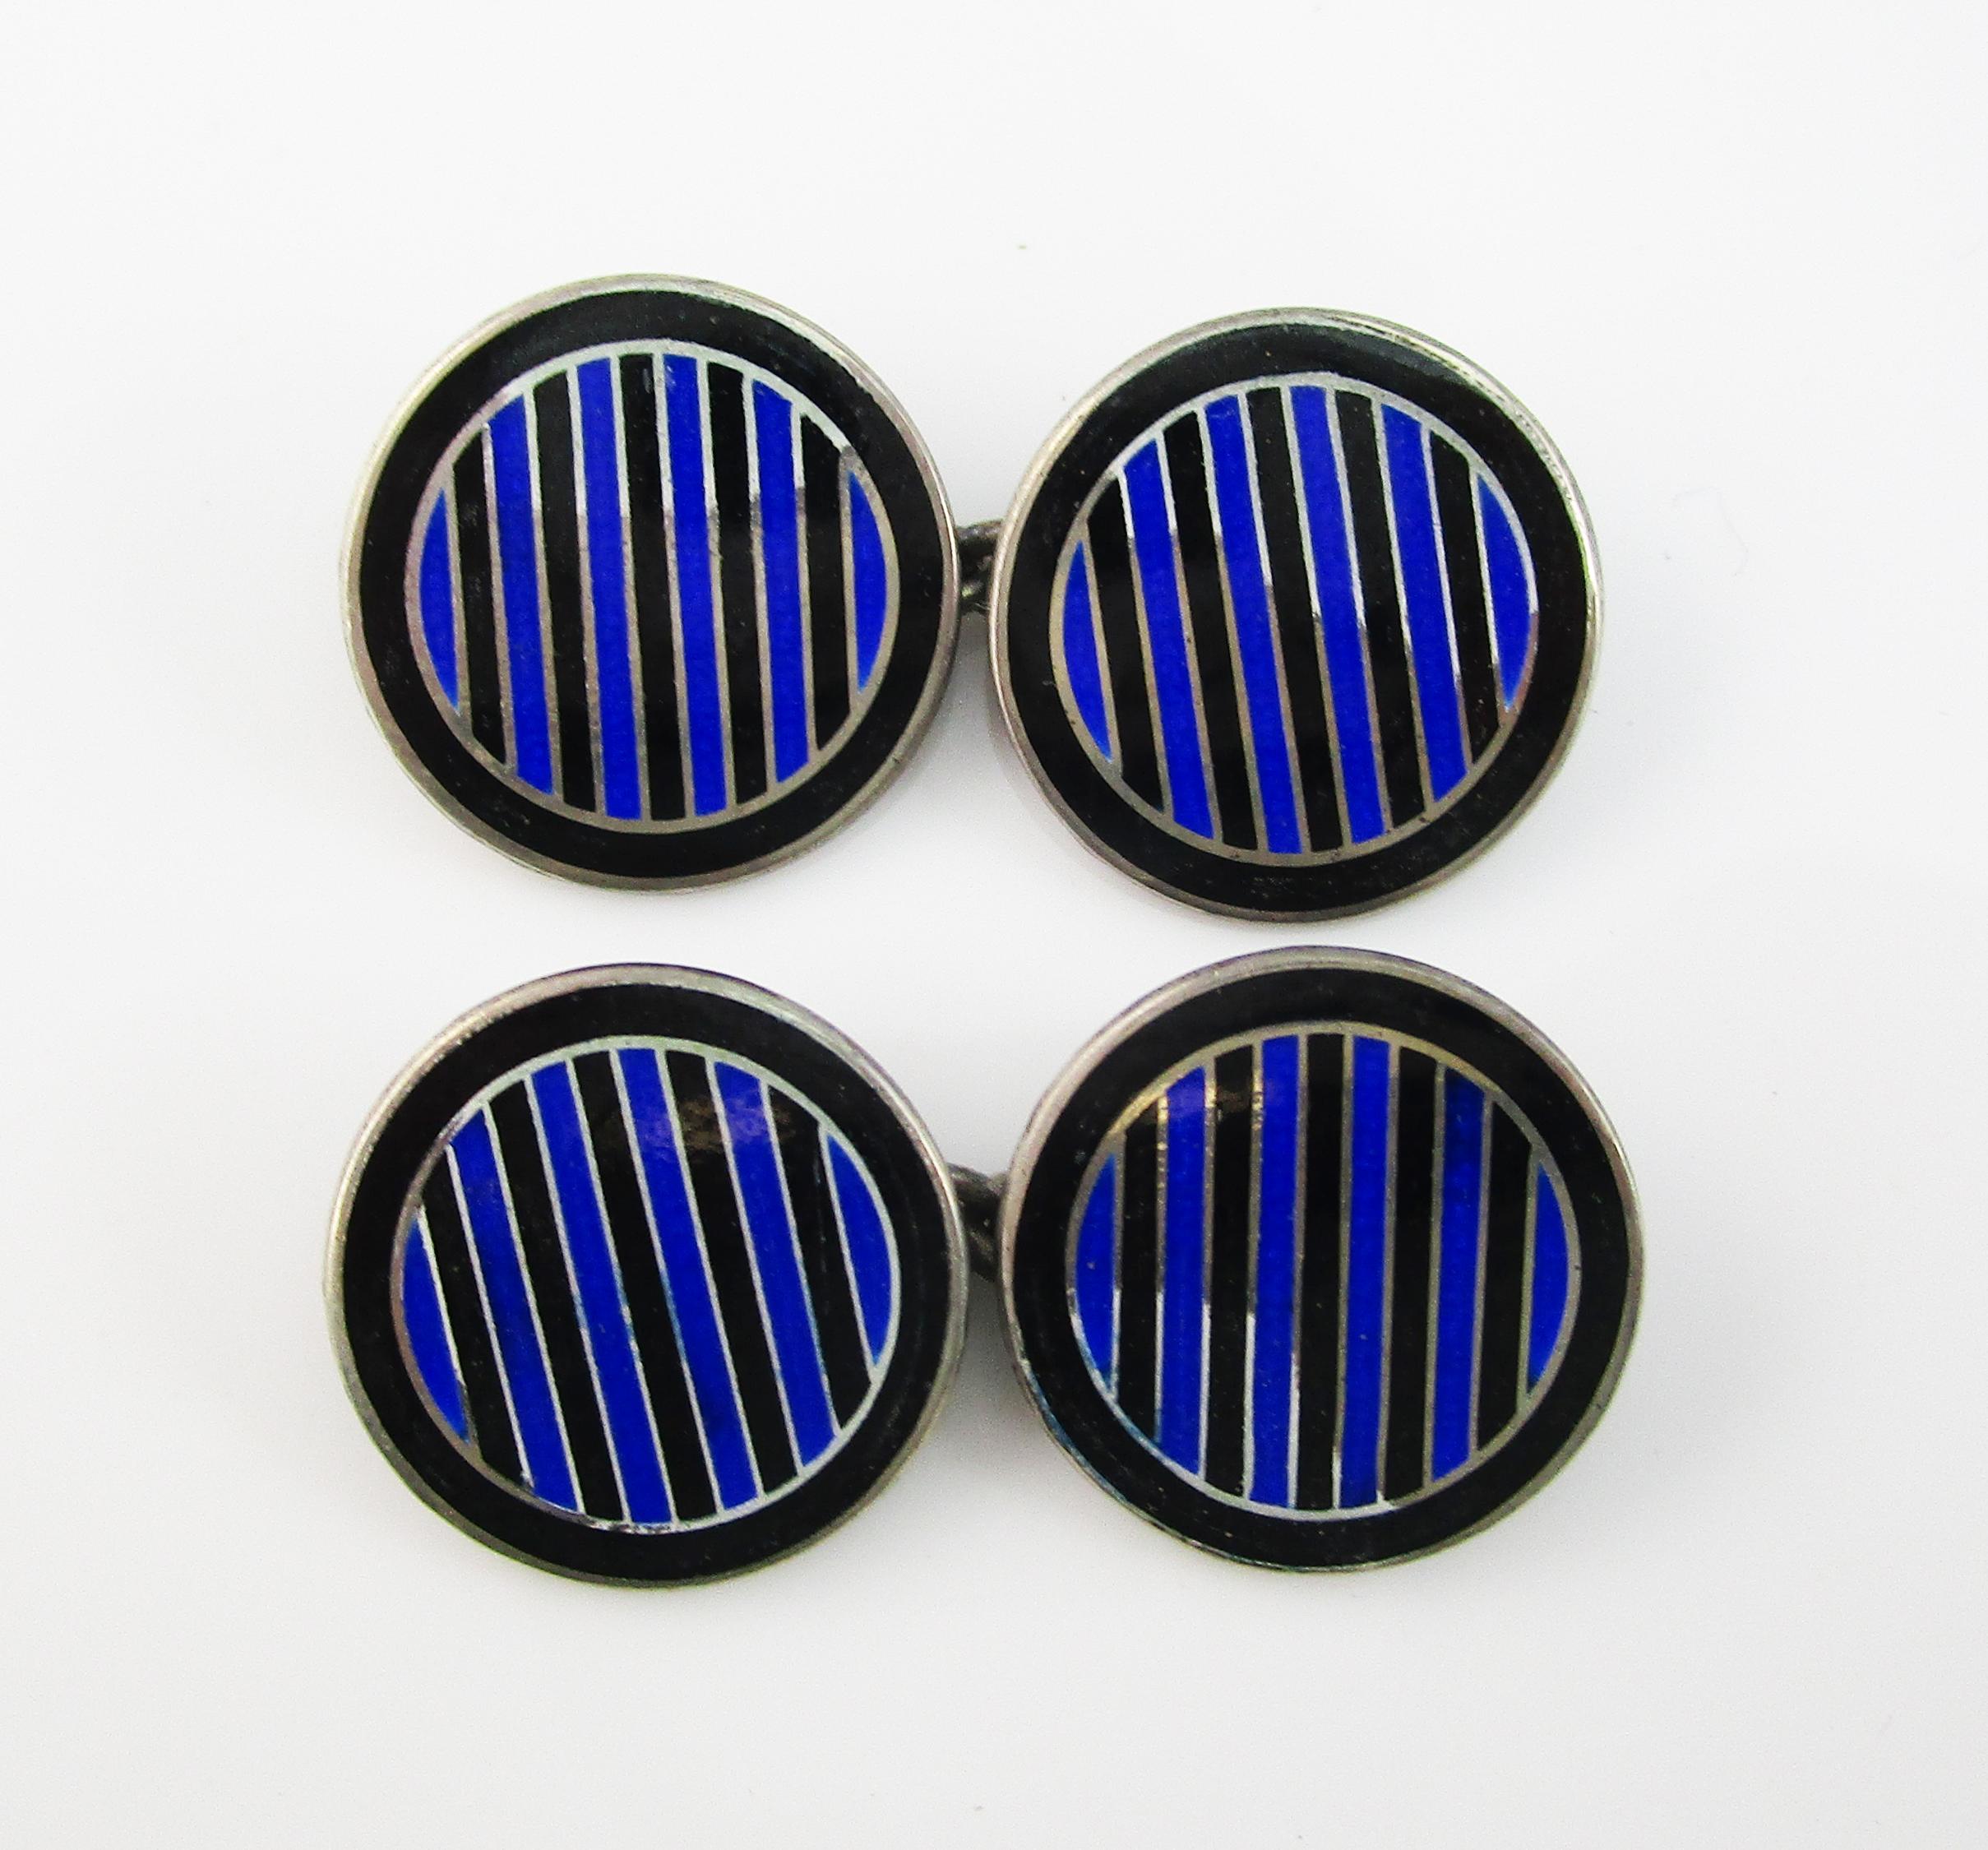 These great Deco cufflinks are in sterling silver and feature a classic round design decorated with black and blue enamel. The panels feature a black enamel frame that is filled with alternating black and blue stripes. This classic color combination